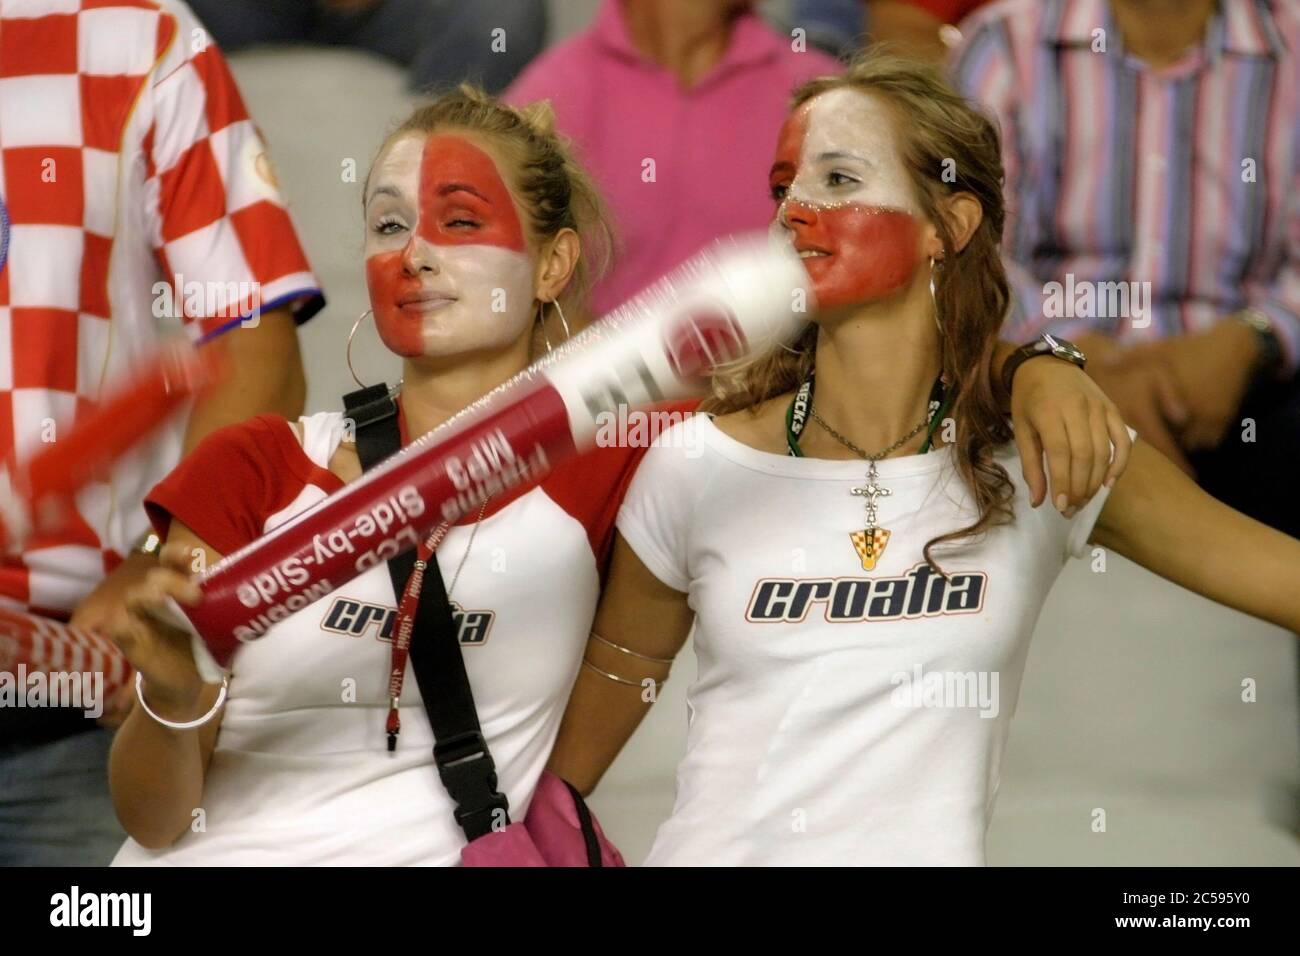 Split, Croatia - 17 August, 2005: Two fiery cheerleaders in the stands during the friendly football game Croatia - Brazil in split 2005 Stock Photo